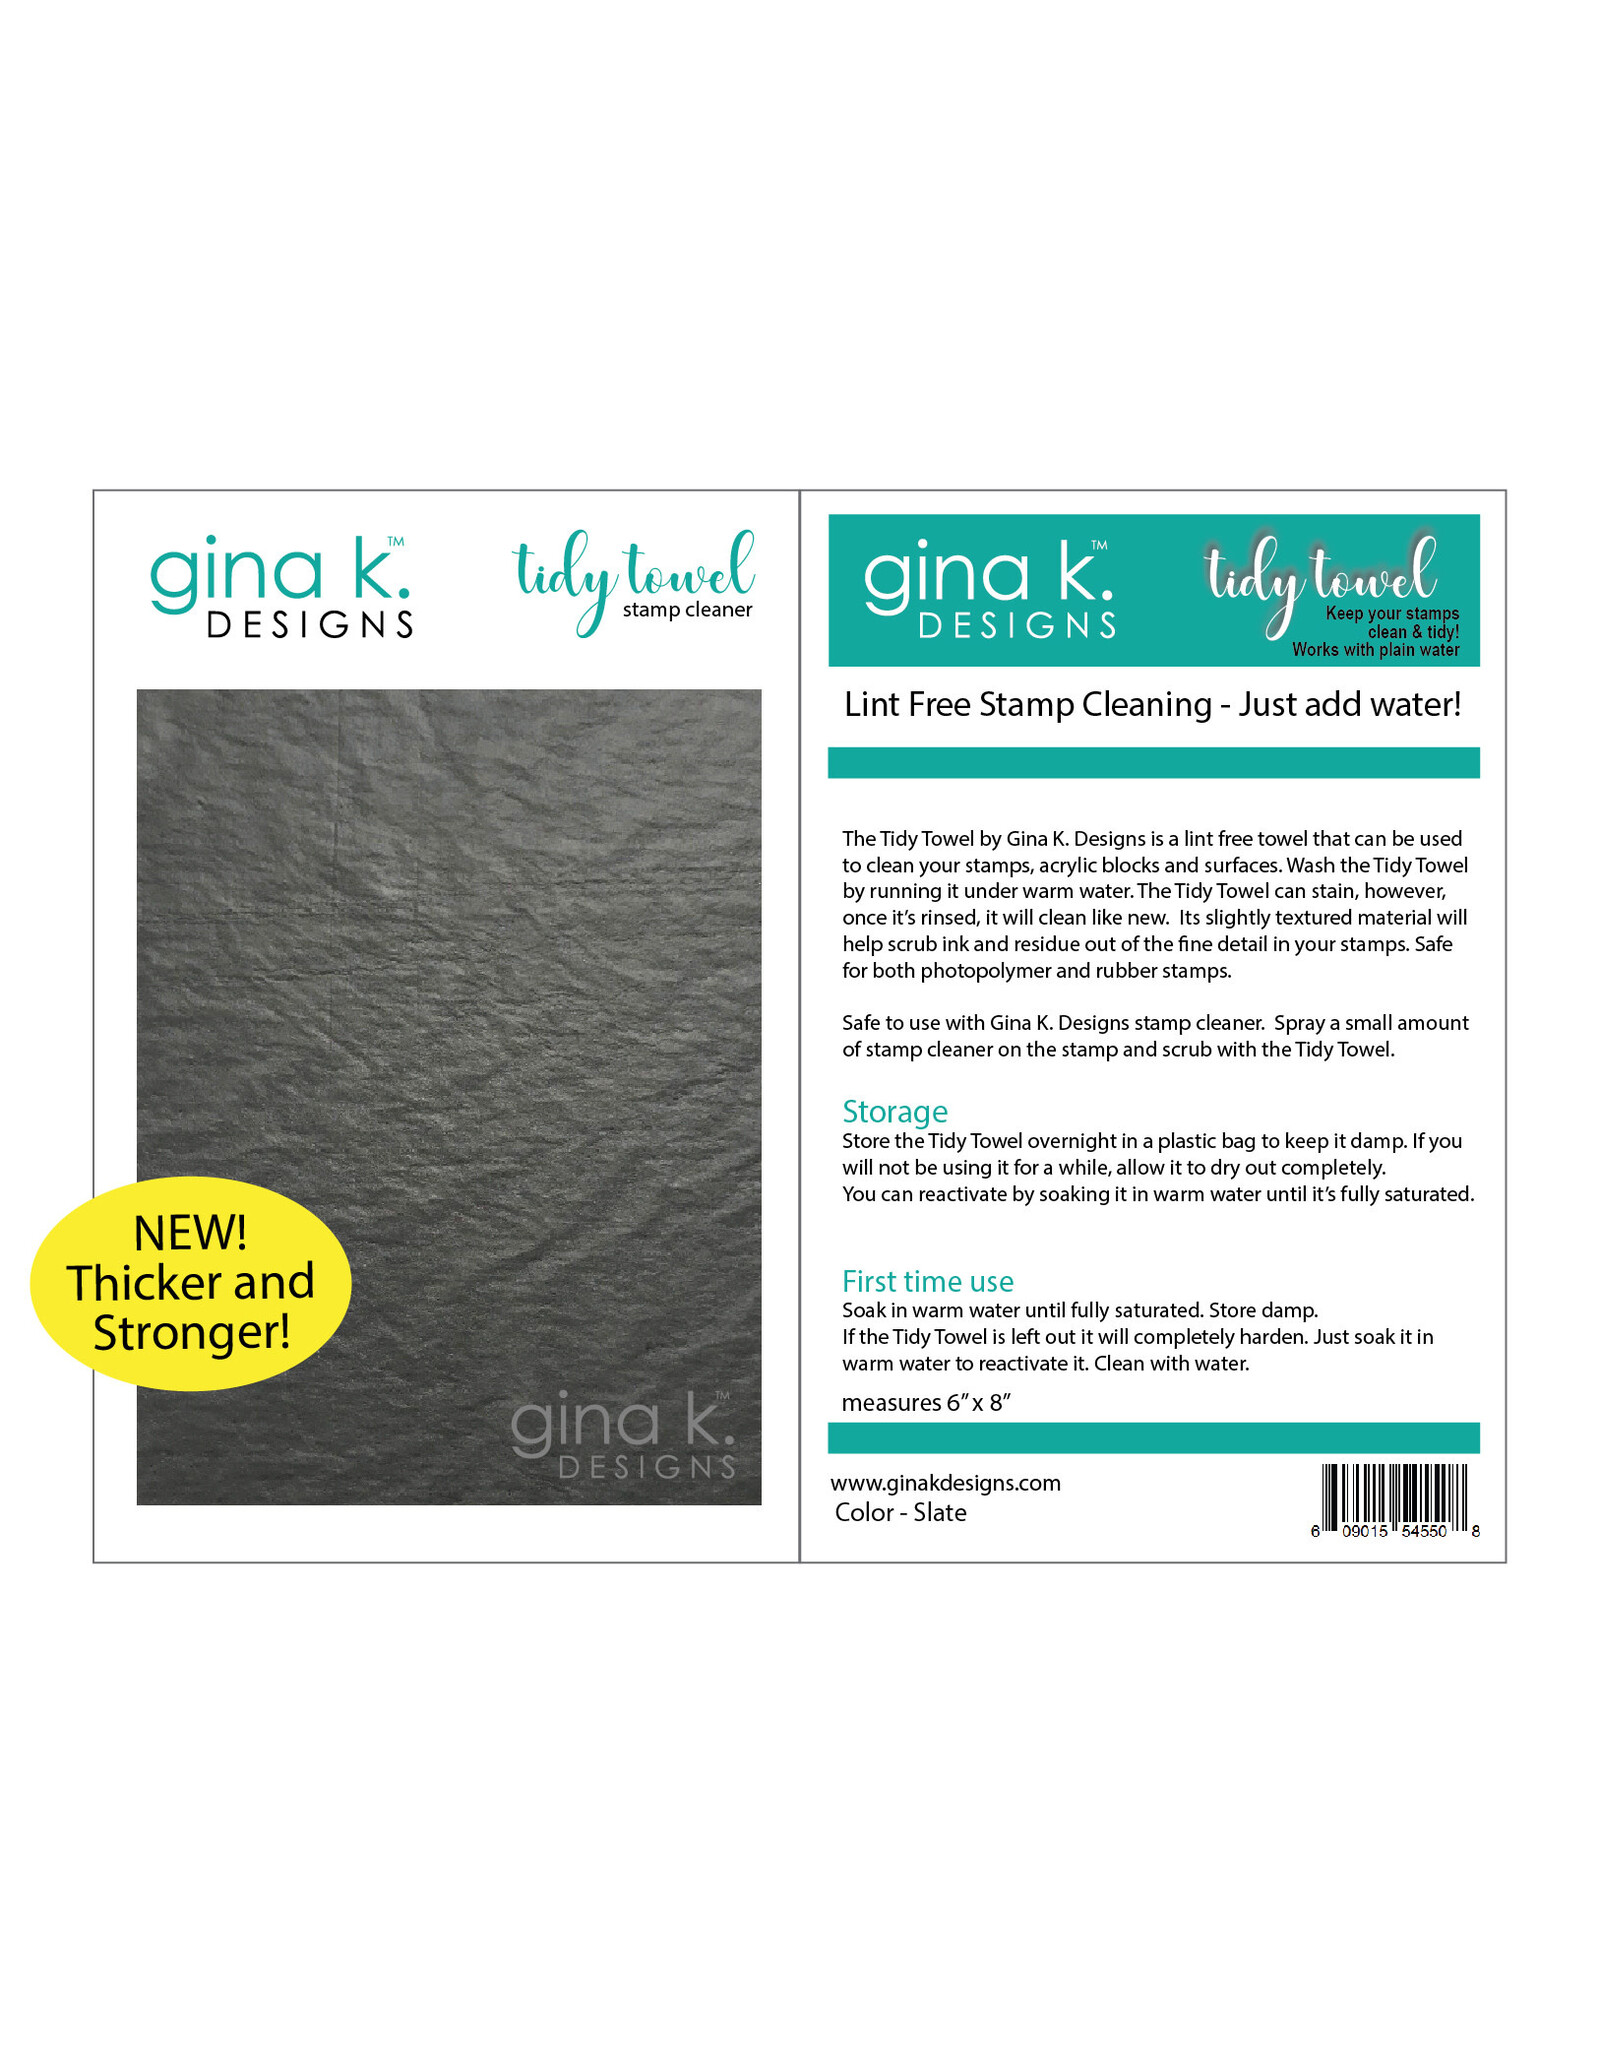 Gina K. Designs Tidy Towel - New & Improved